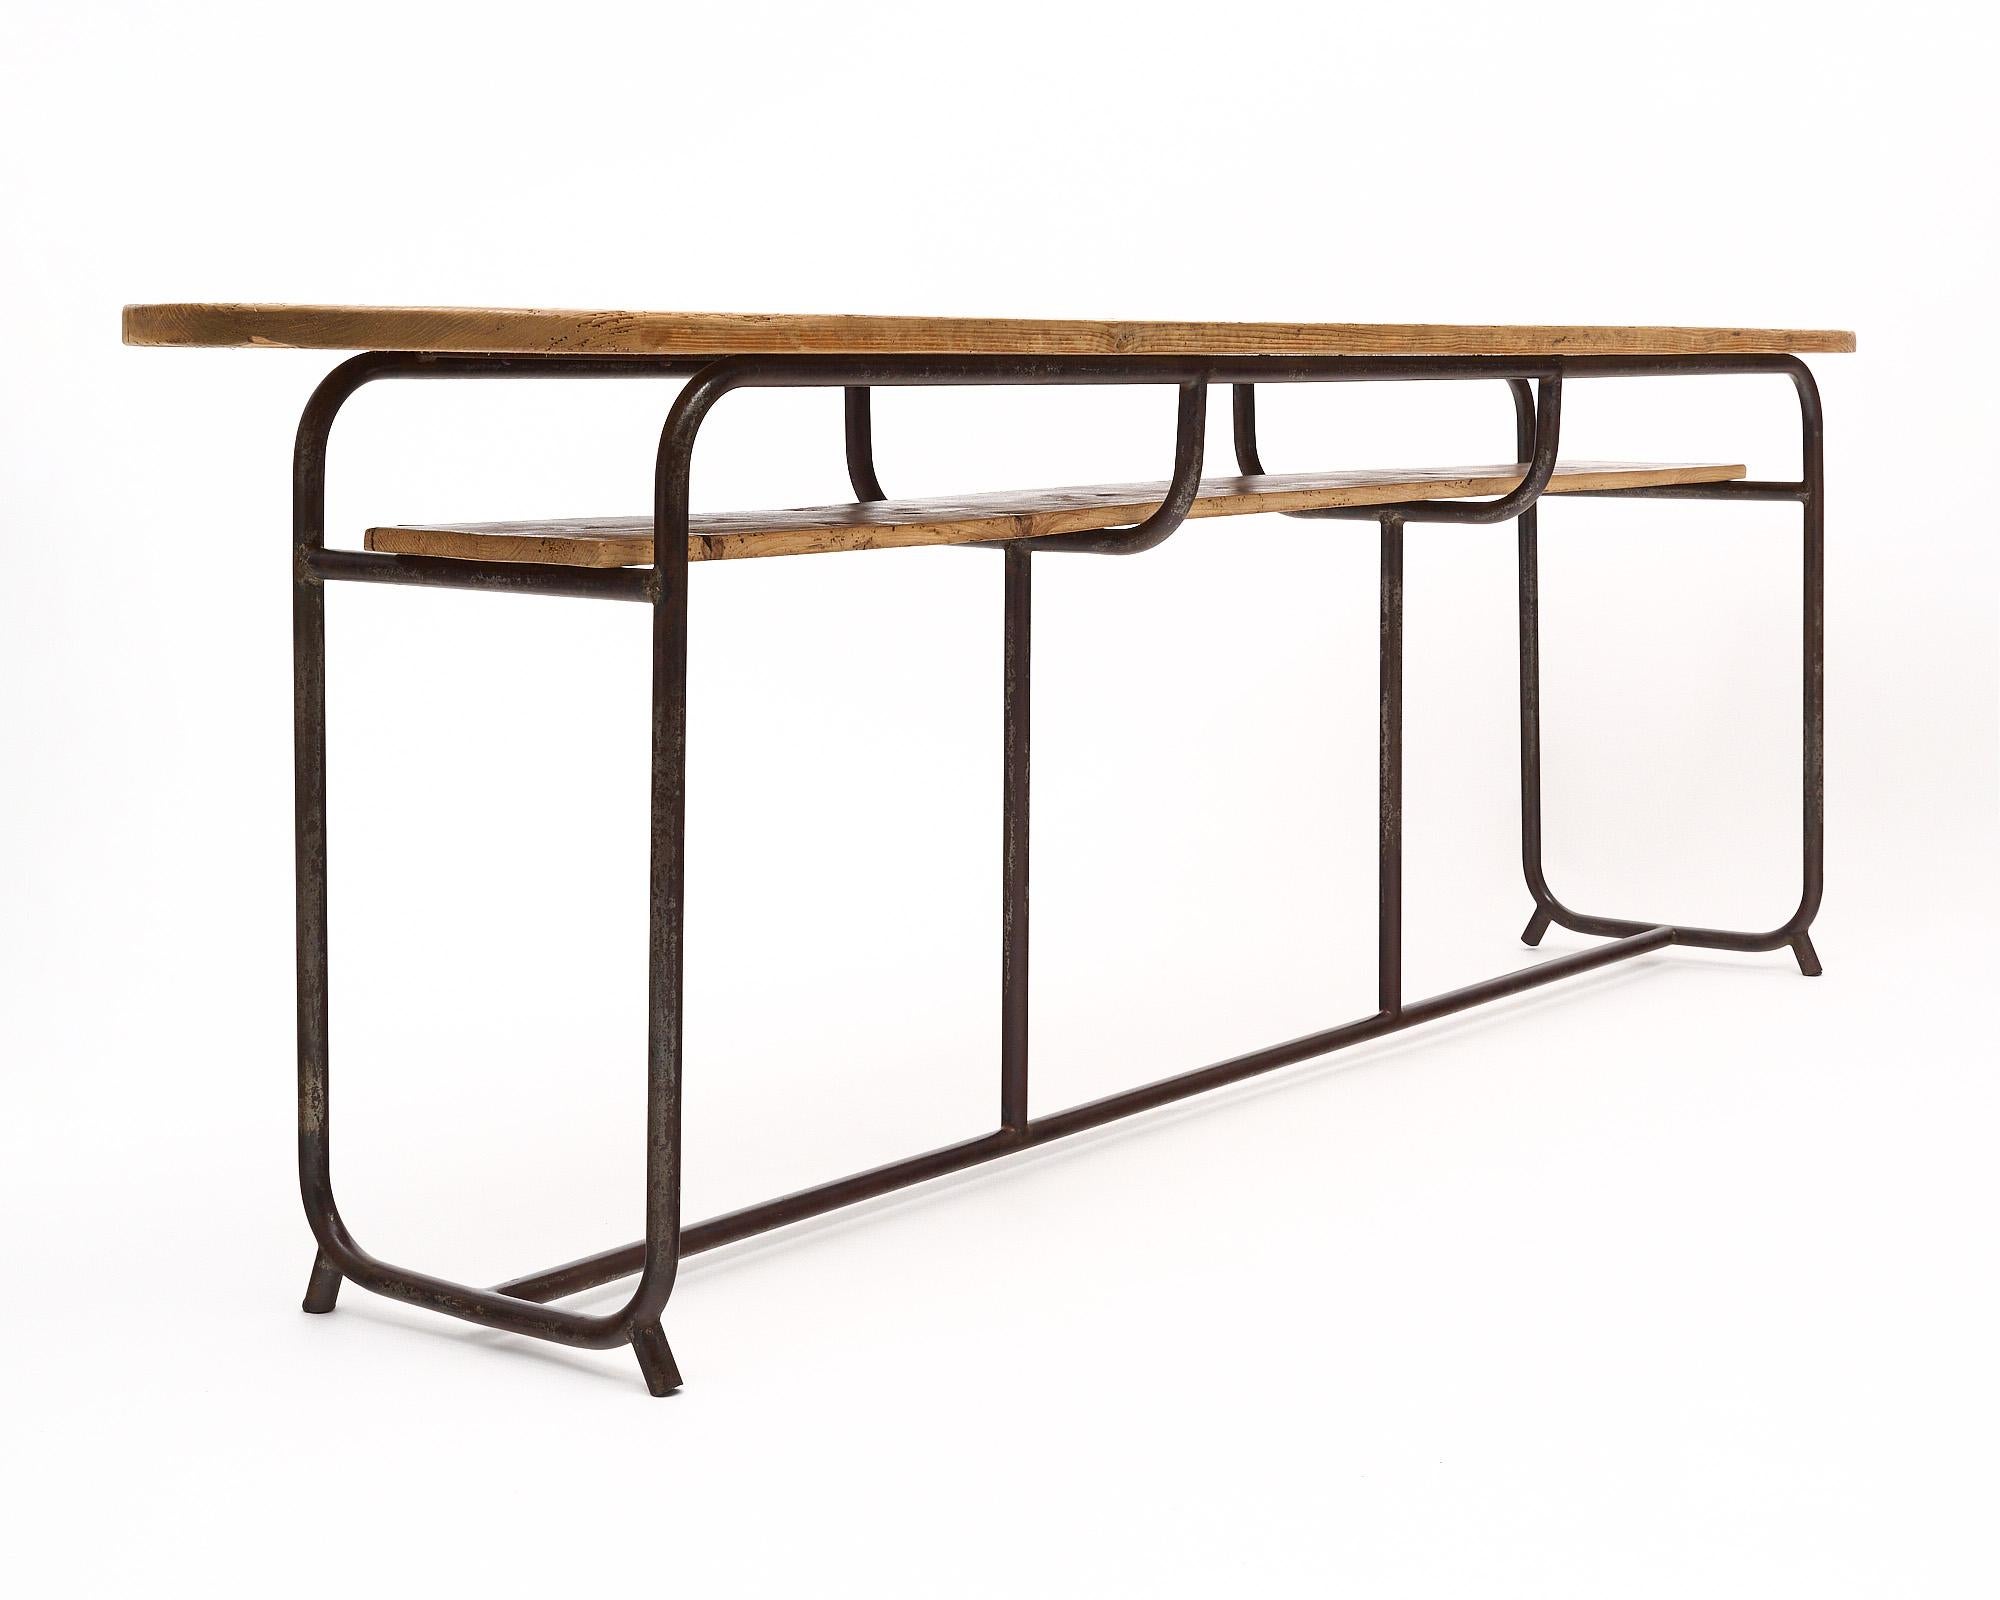 Console table from France in the industrial style. The structure is made of iron and features a wood top and wood shelf below for functionality.